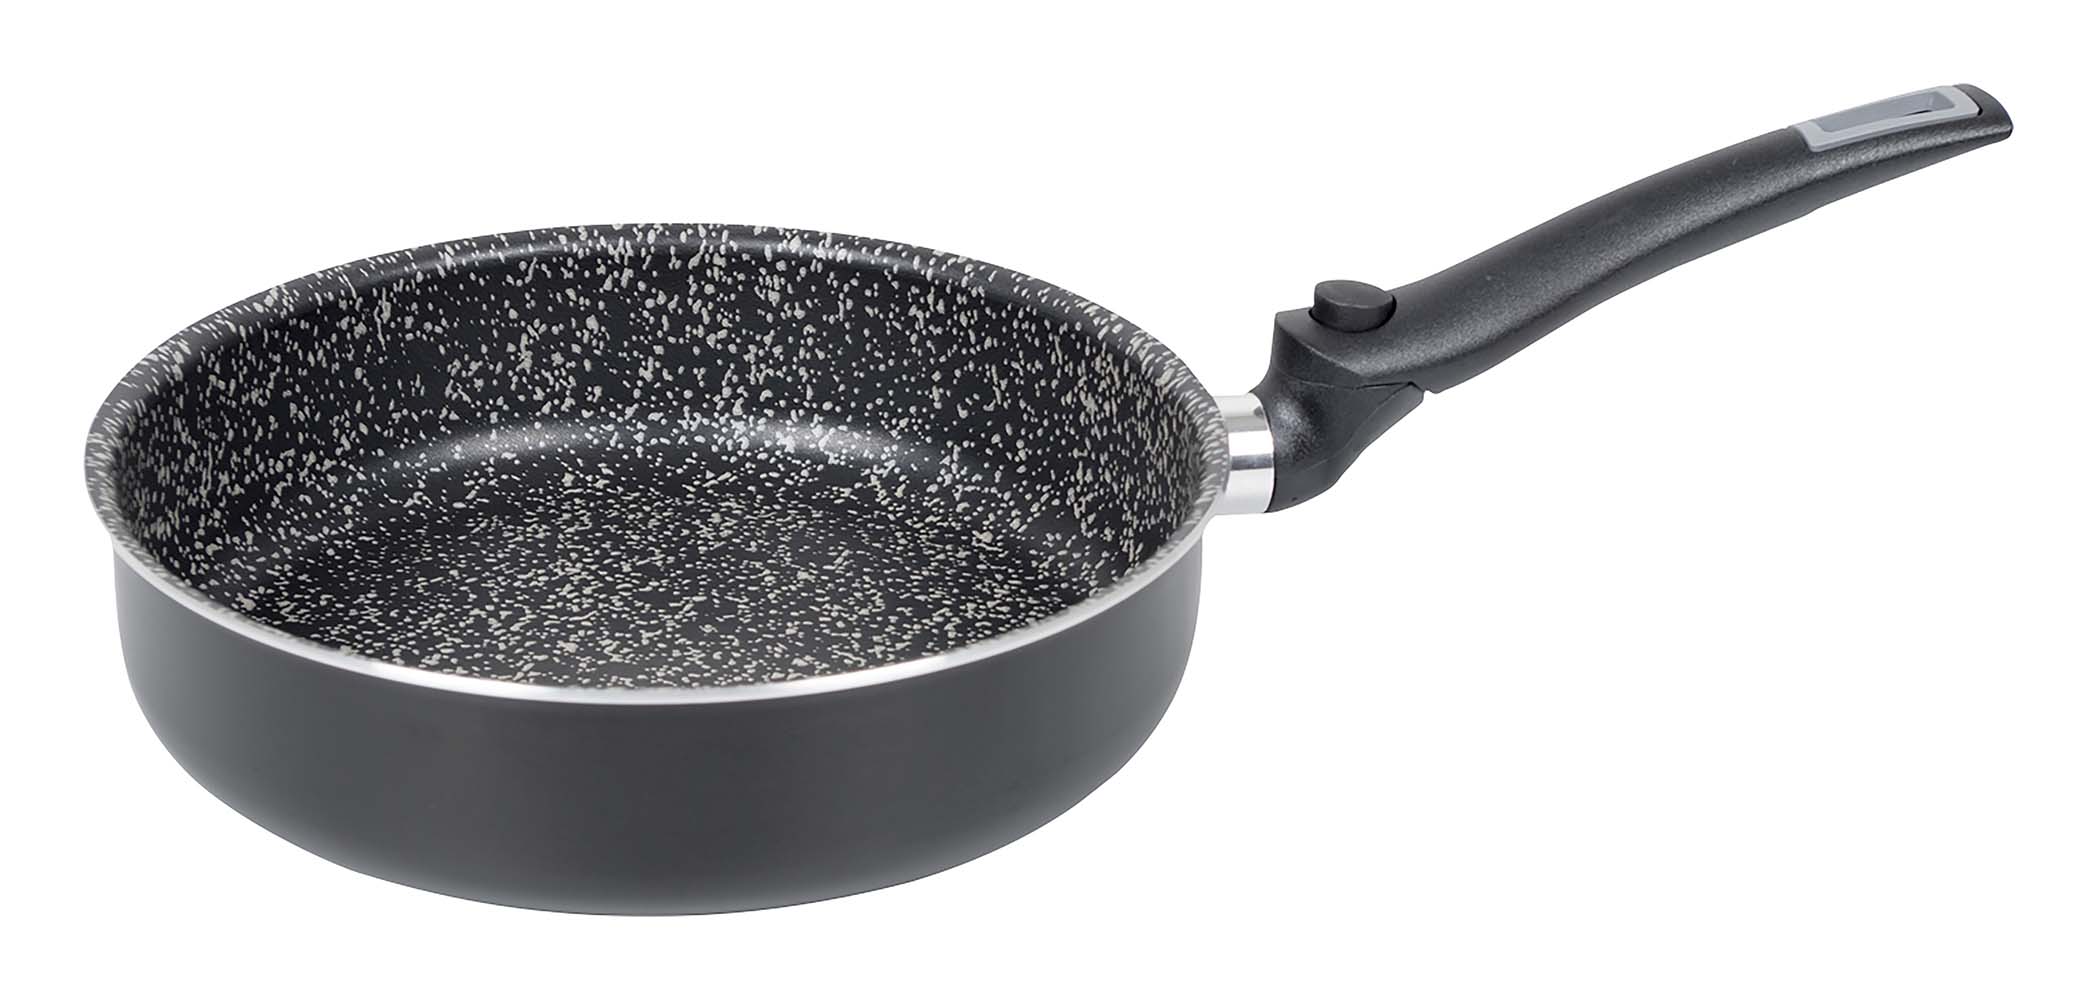 2304454 An aluminium sauté pan with foldaway handle. Comes with a 5 layer Salus Stone coating and an anti-slip base. This pan has a foldaway handle and therefore makes good use of space and is easy to take with you. Dishwasher safe and suitable for heat sources gas, ceramic,electric and induction. Thickness: 2.5 millimetres.